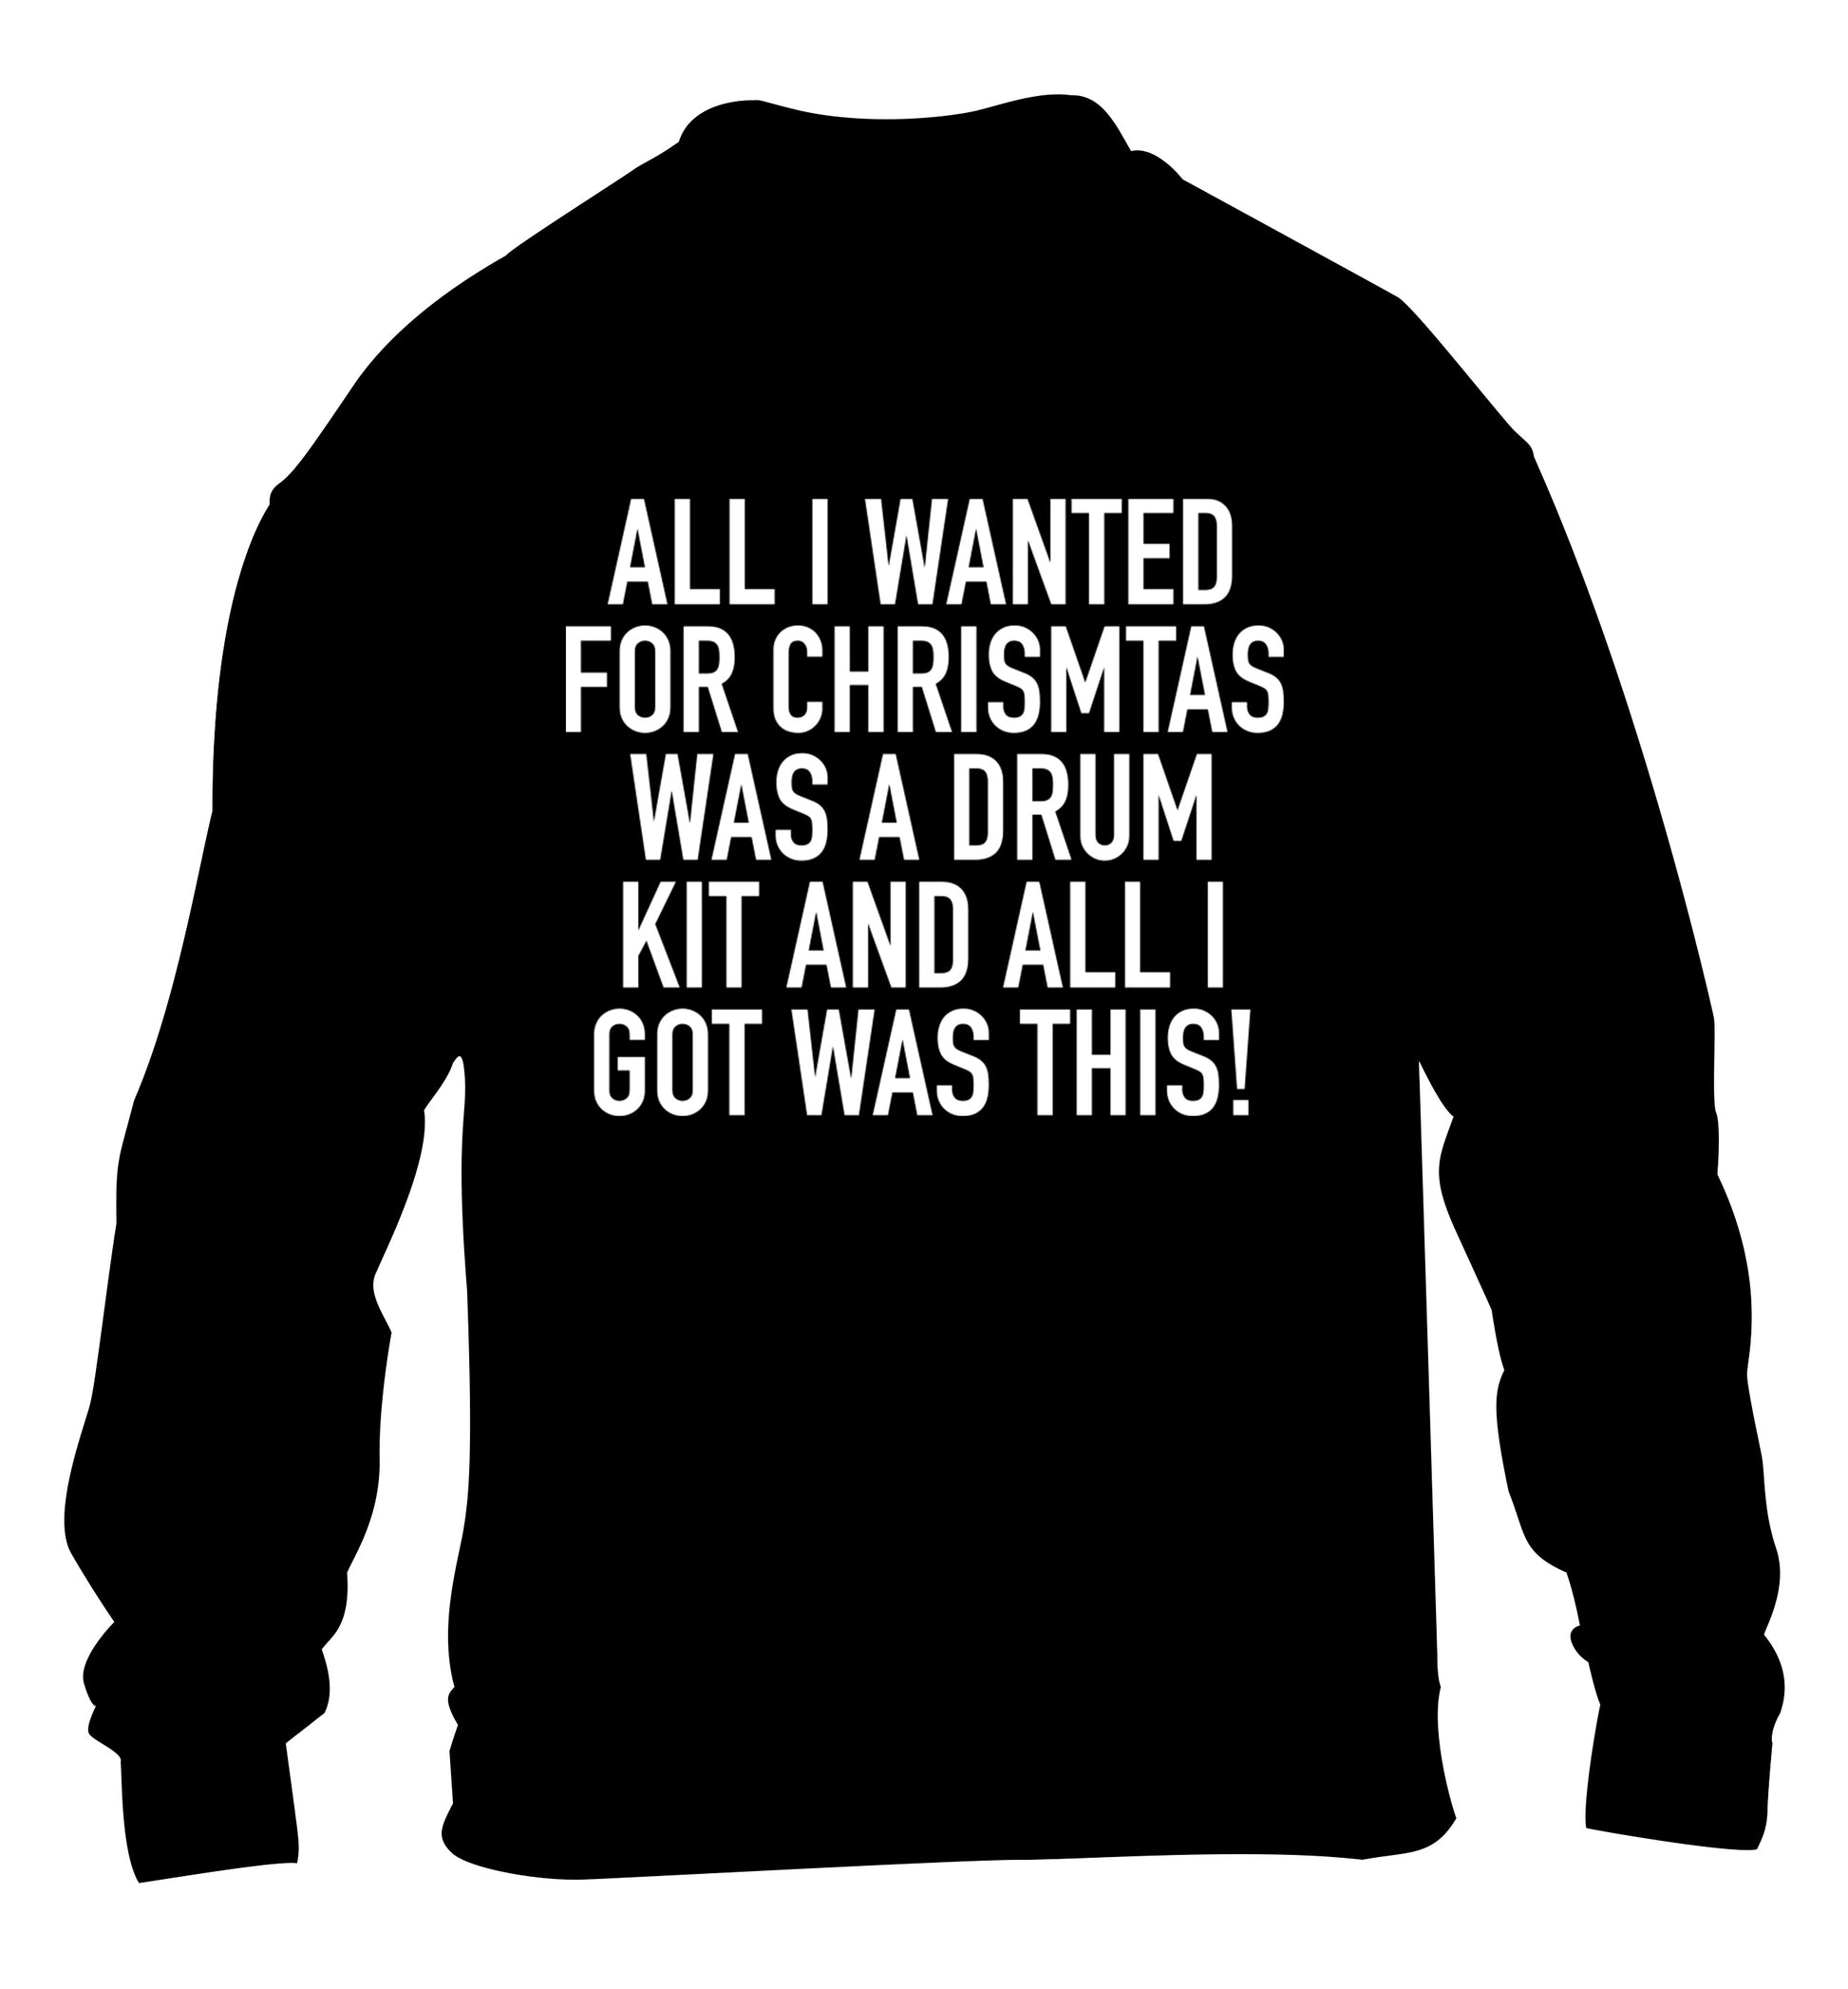 All I wanted for Christmas was a drum kit and all I got was this! children's black sweater 12-14 Years